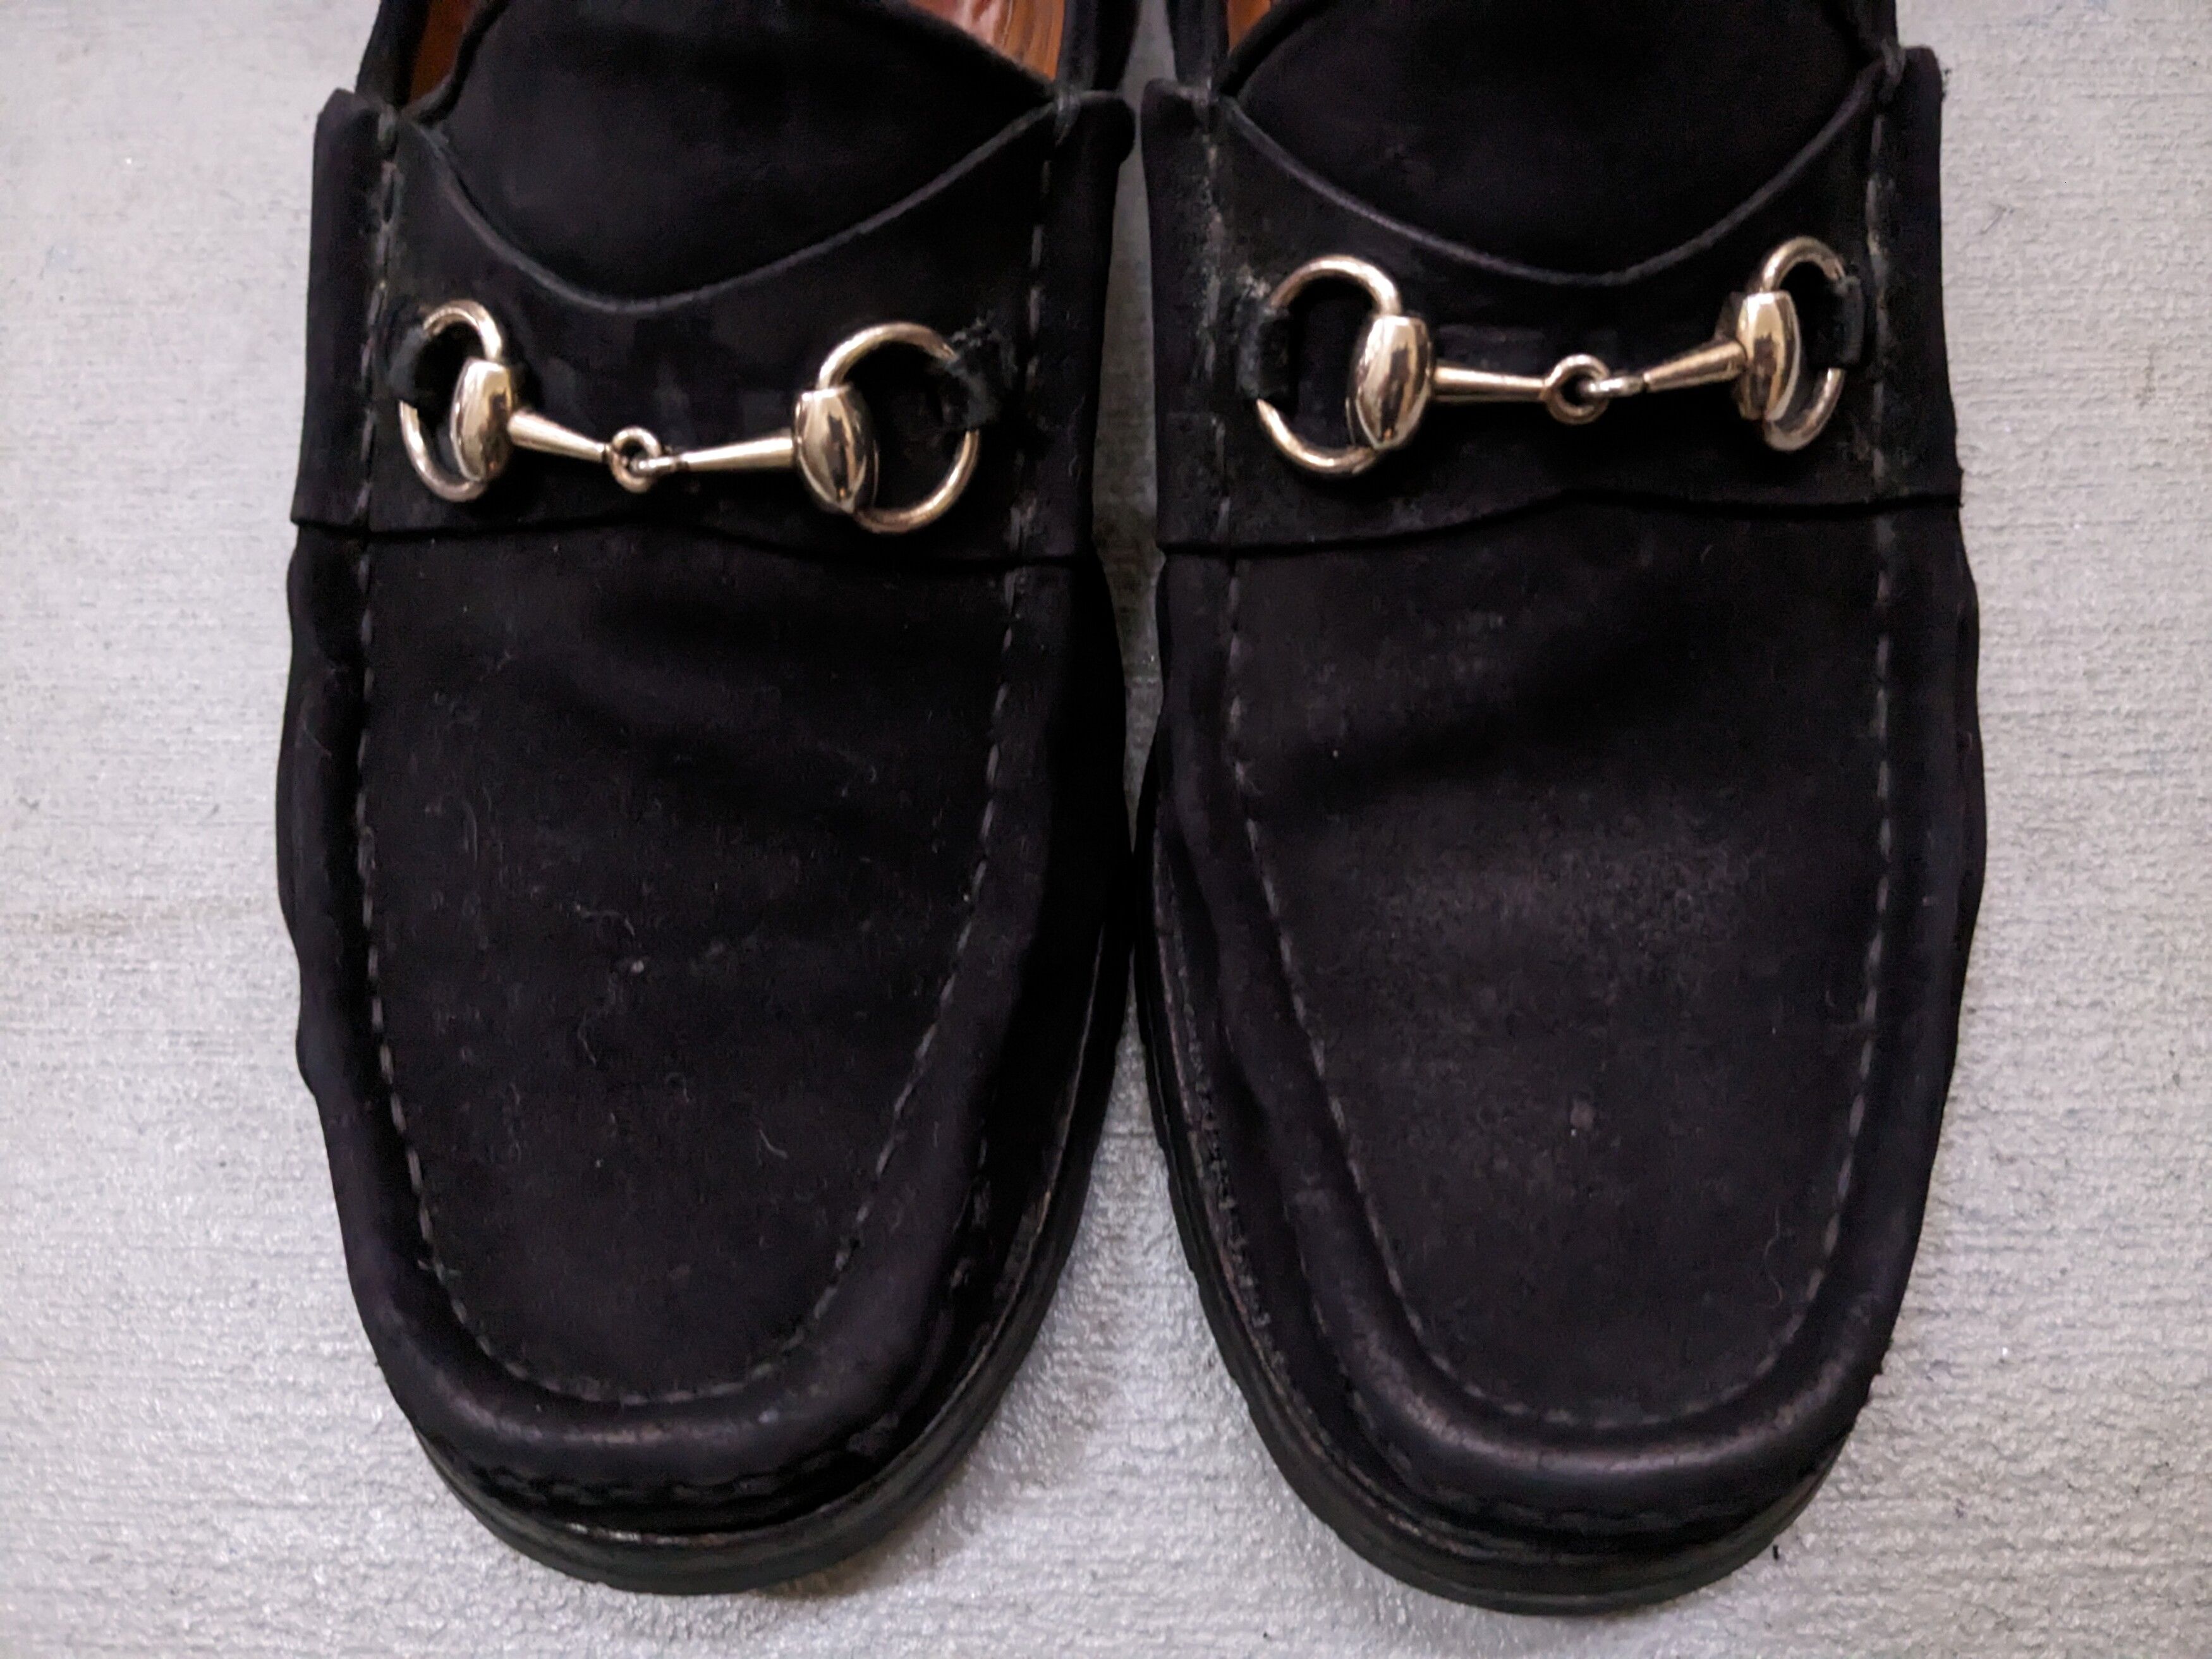 Gucci Gucci Horsebit Loafers Black Leather Size 9.5 Italy Slip On Size US 9.5 / EU 42-43 - 5 Thumbnail